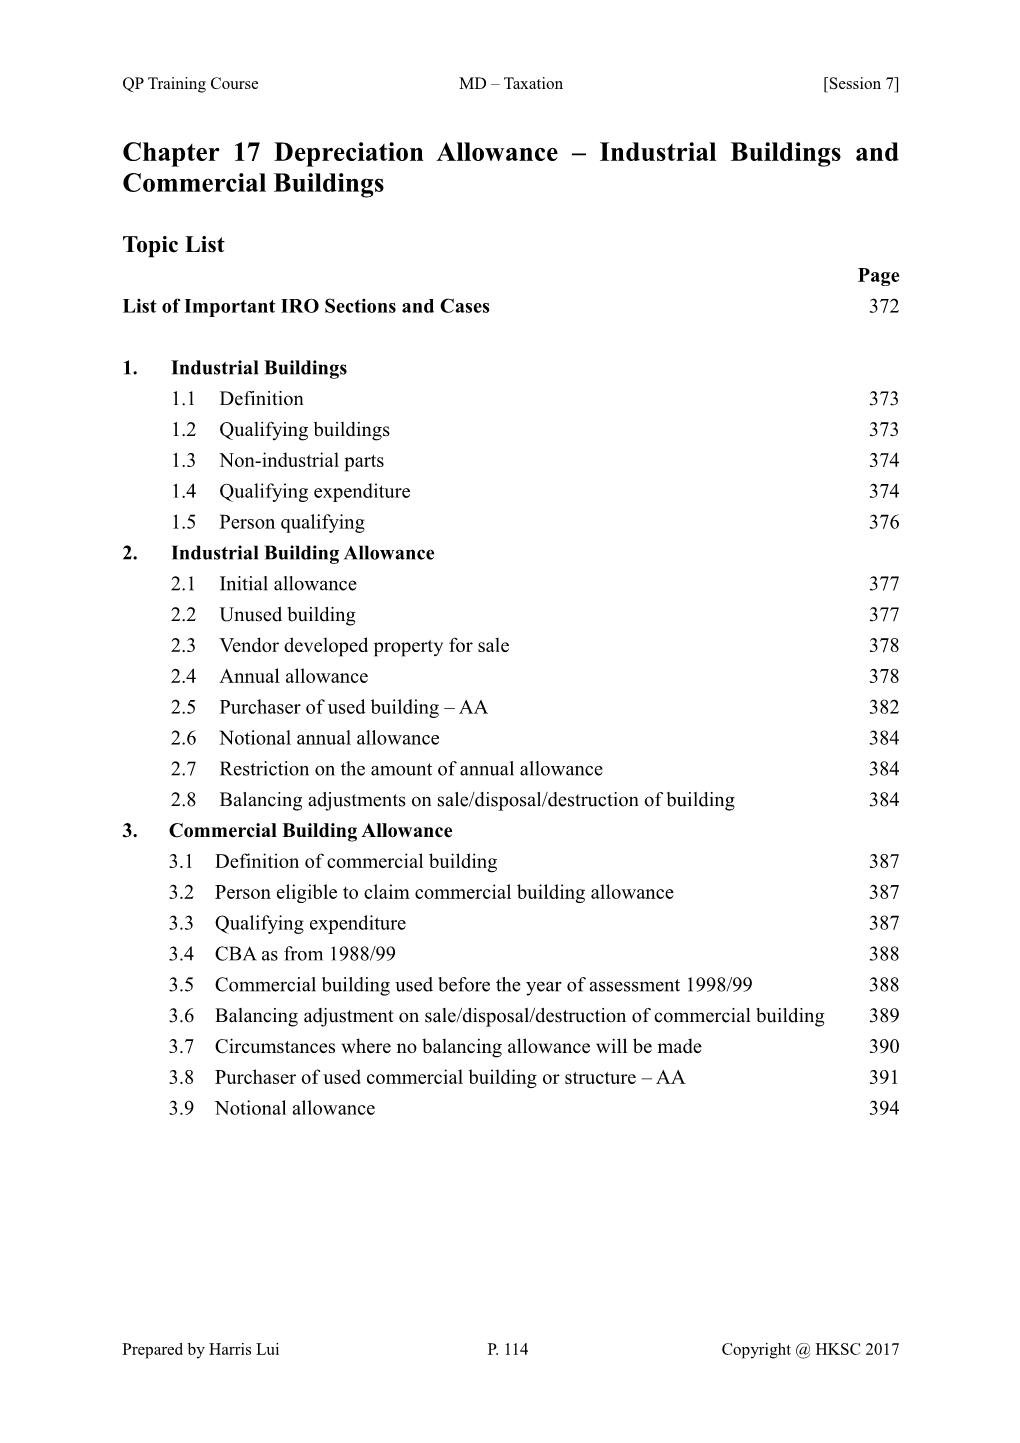 Chapter 15 Depreciation Allowance Industrial Buildings and Commercial Buildings